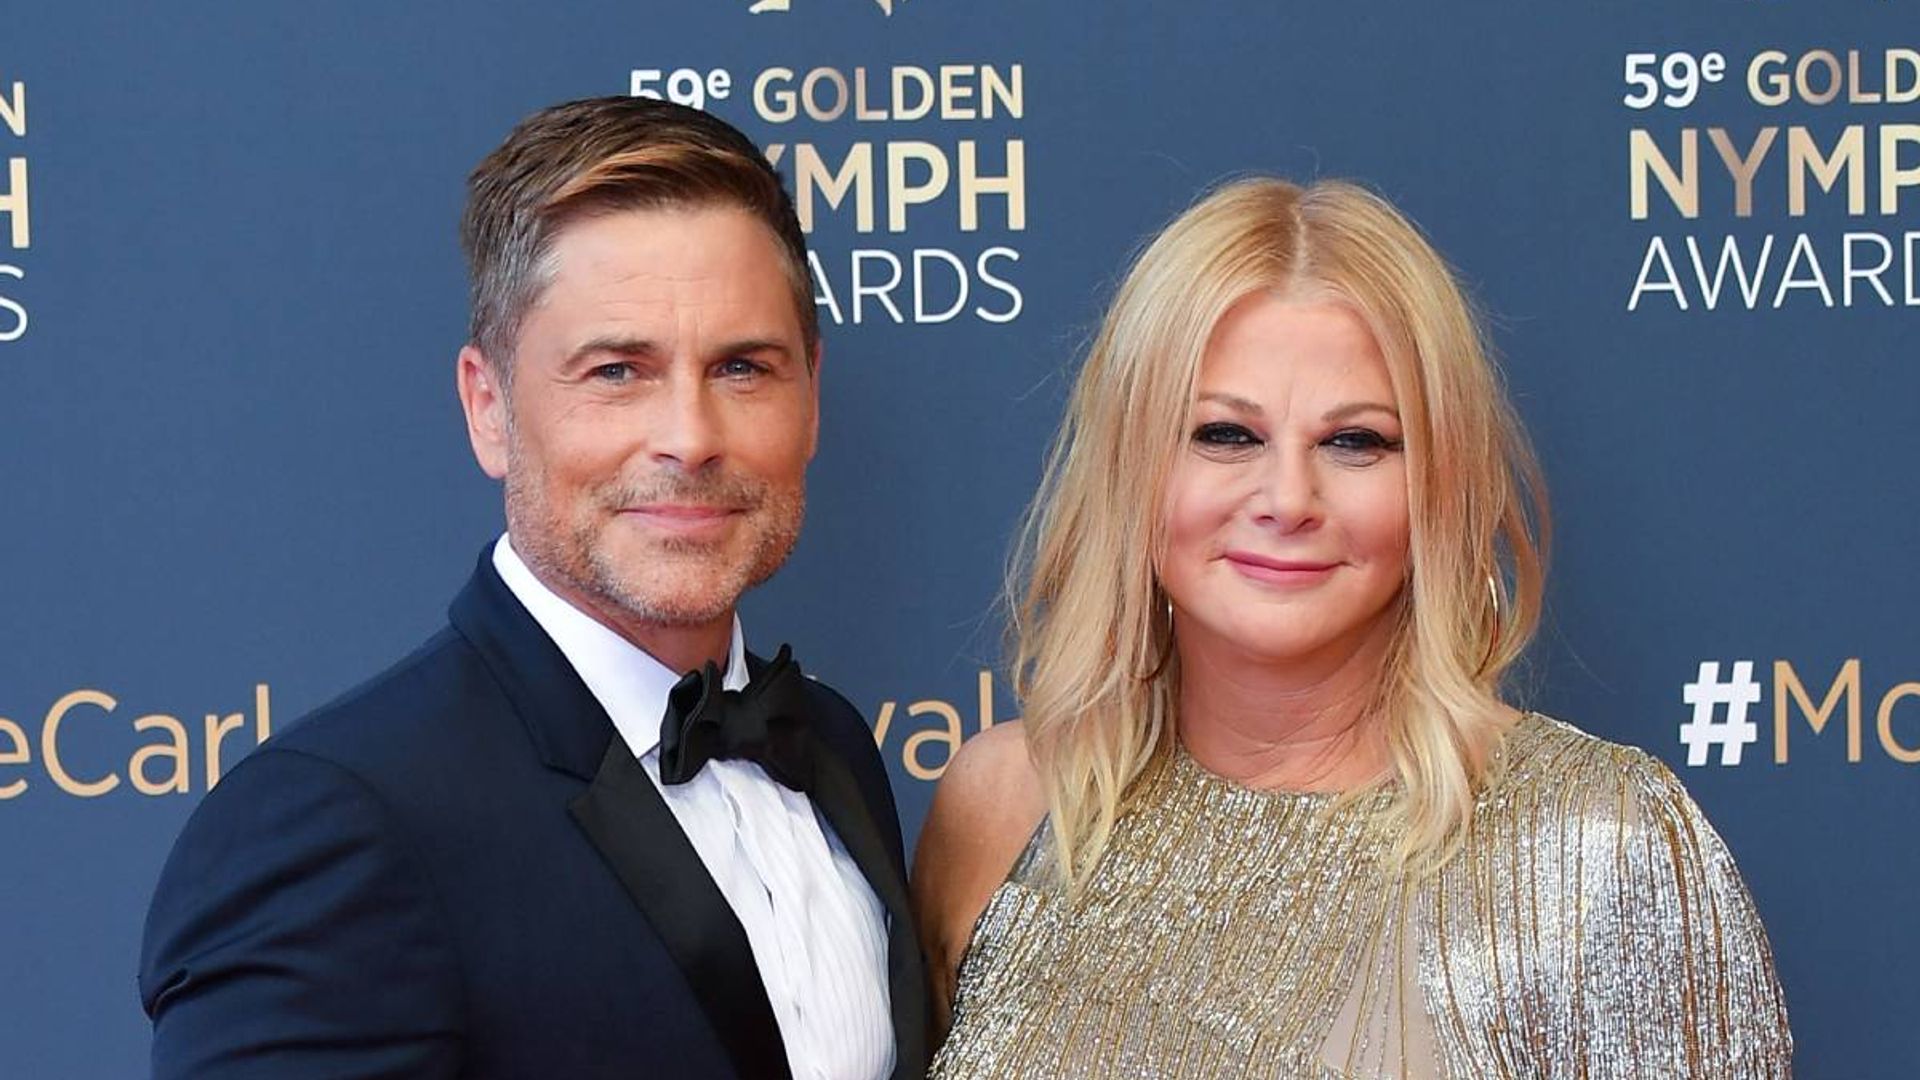 Rob Lowe gushes over wife Sheryl Berkoff in sentimental ...